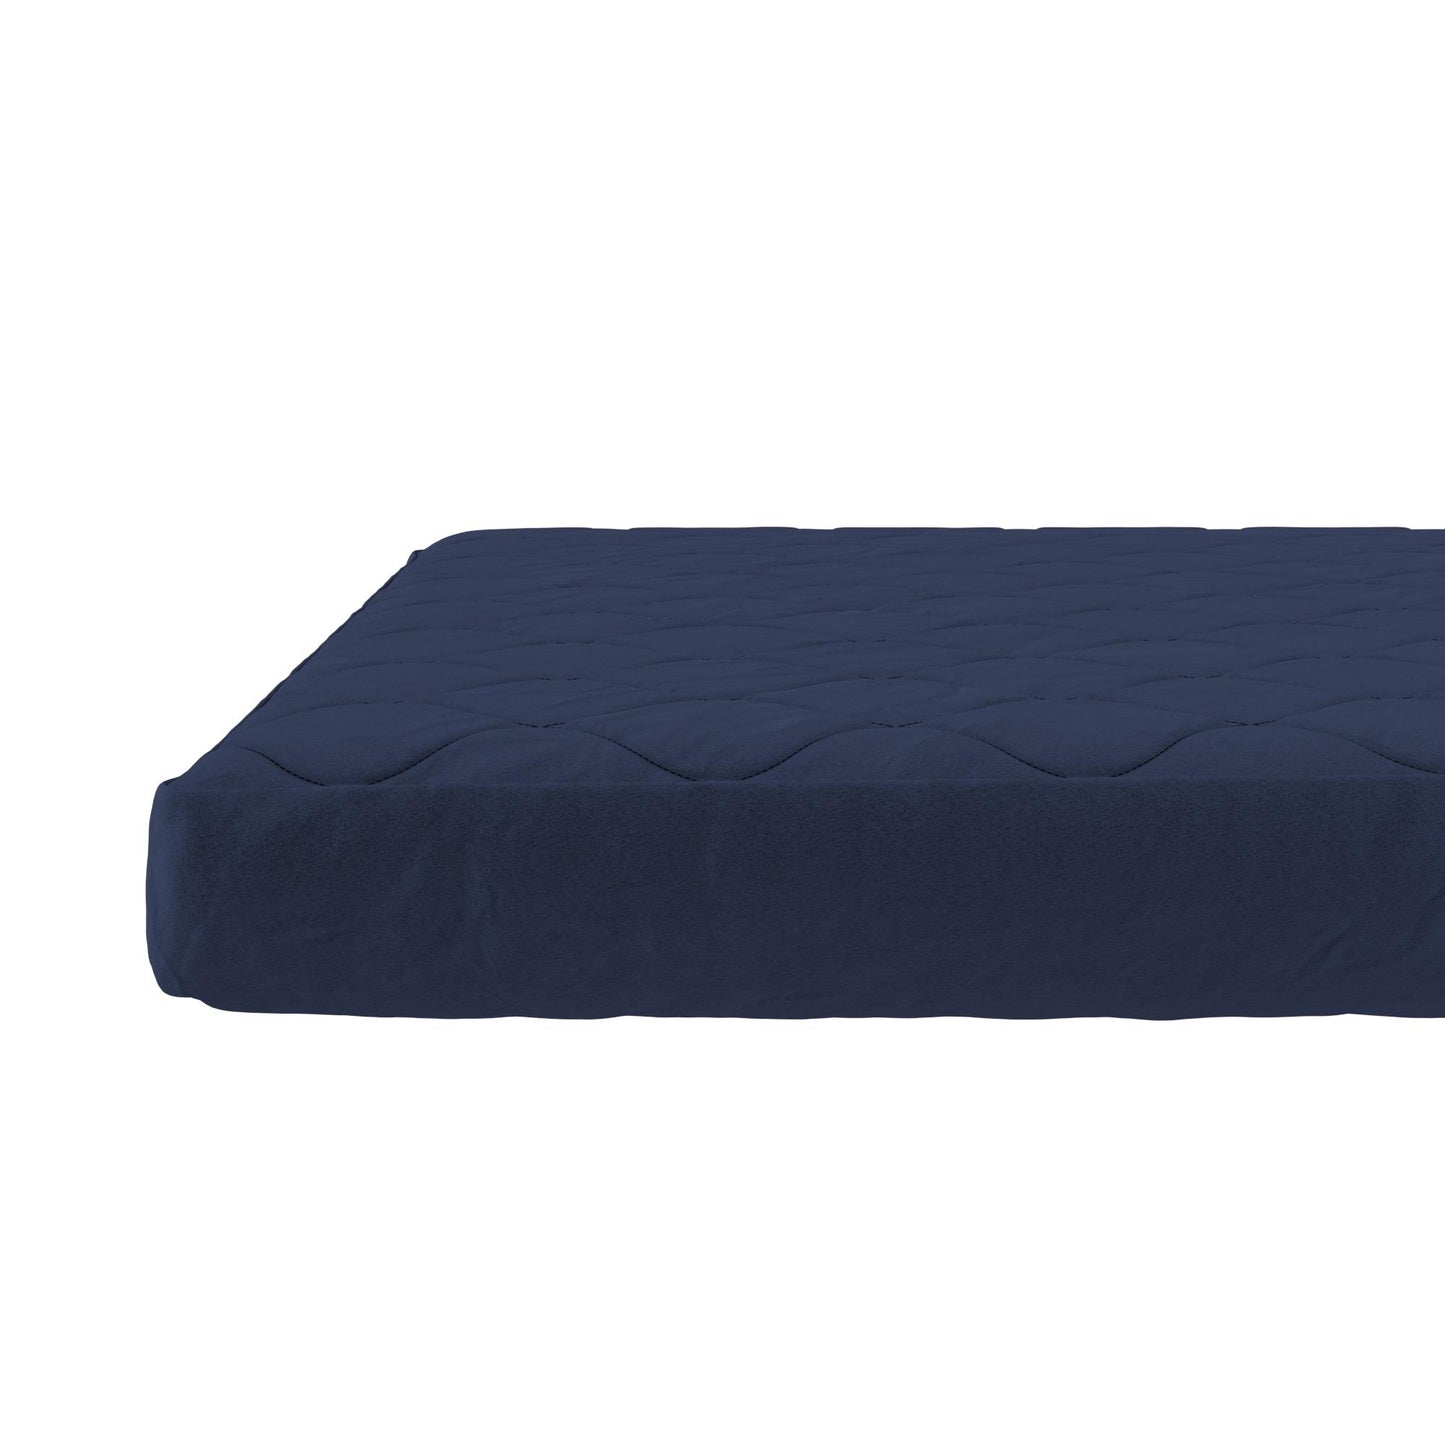 Dana 6 Inch Quilted Mattress with Removable Cover and Thermobonded Polyester Fill - Blue - Twin